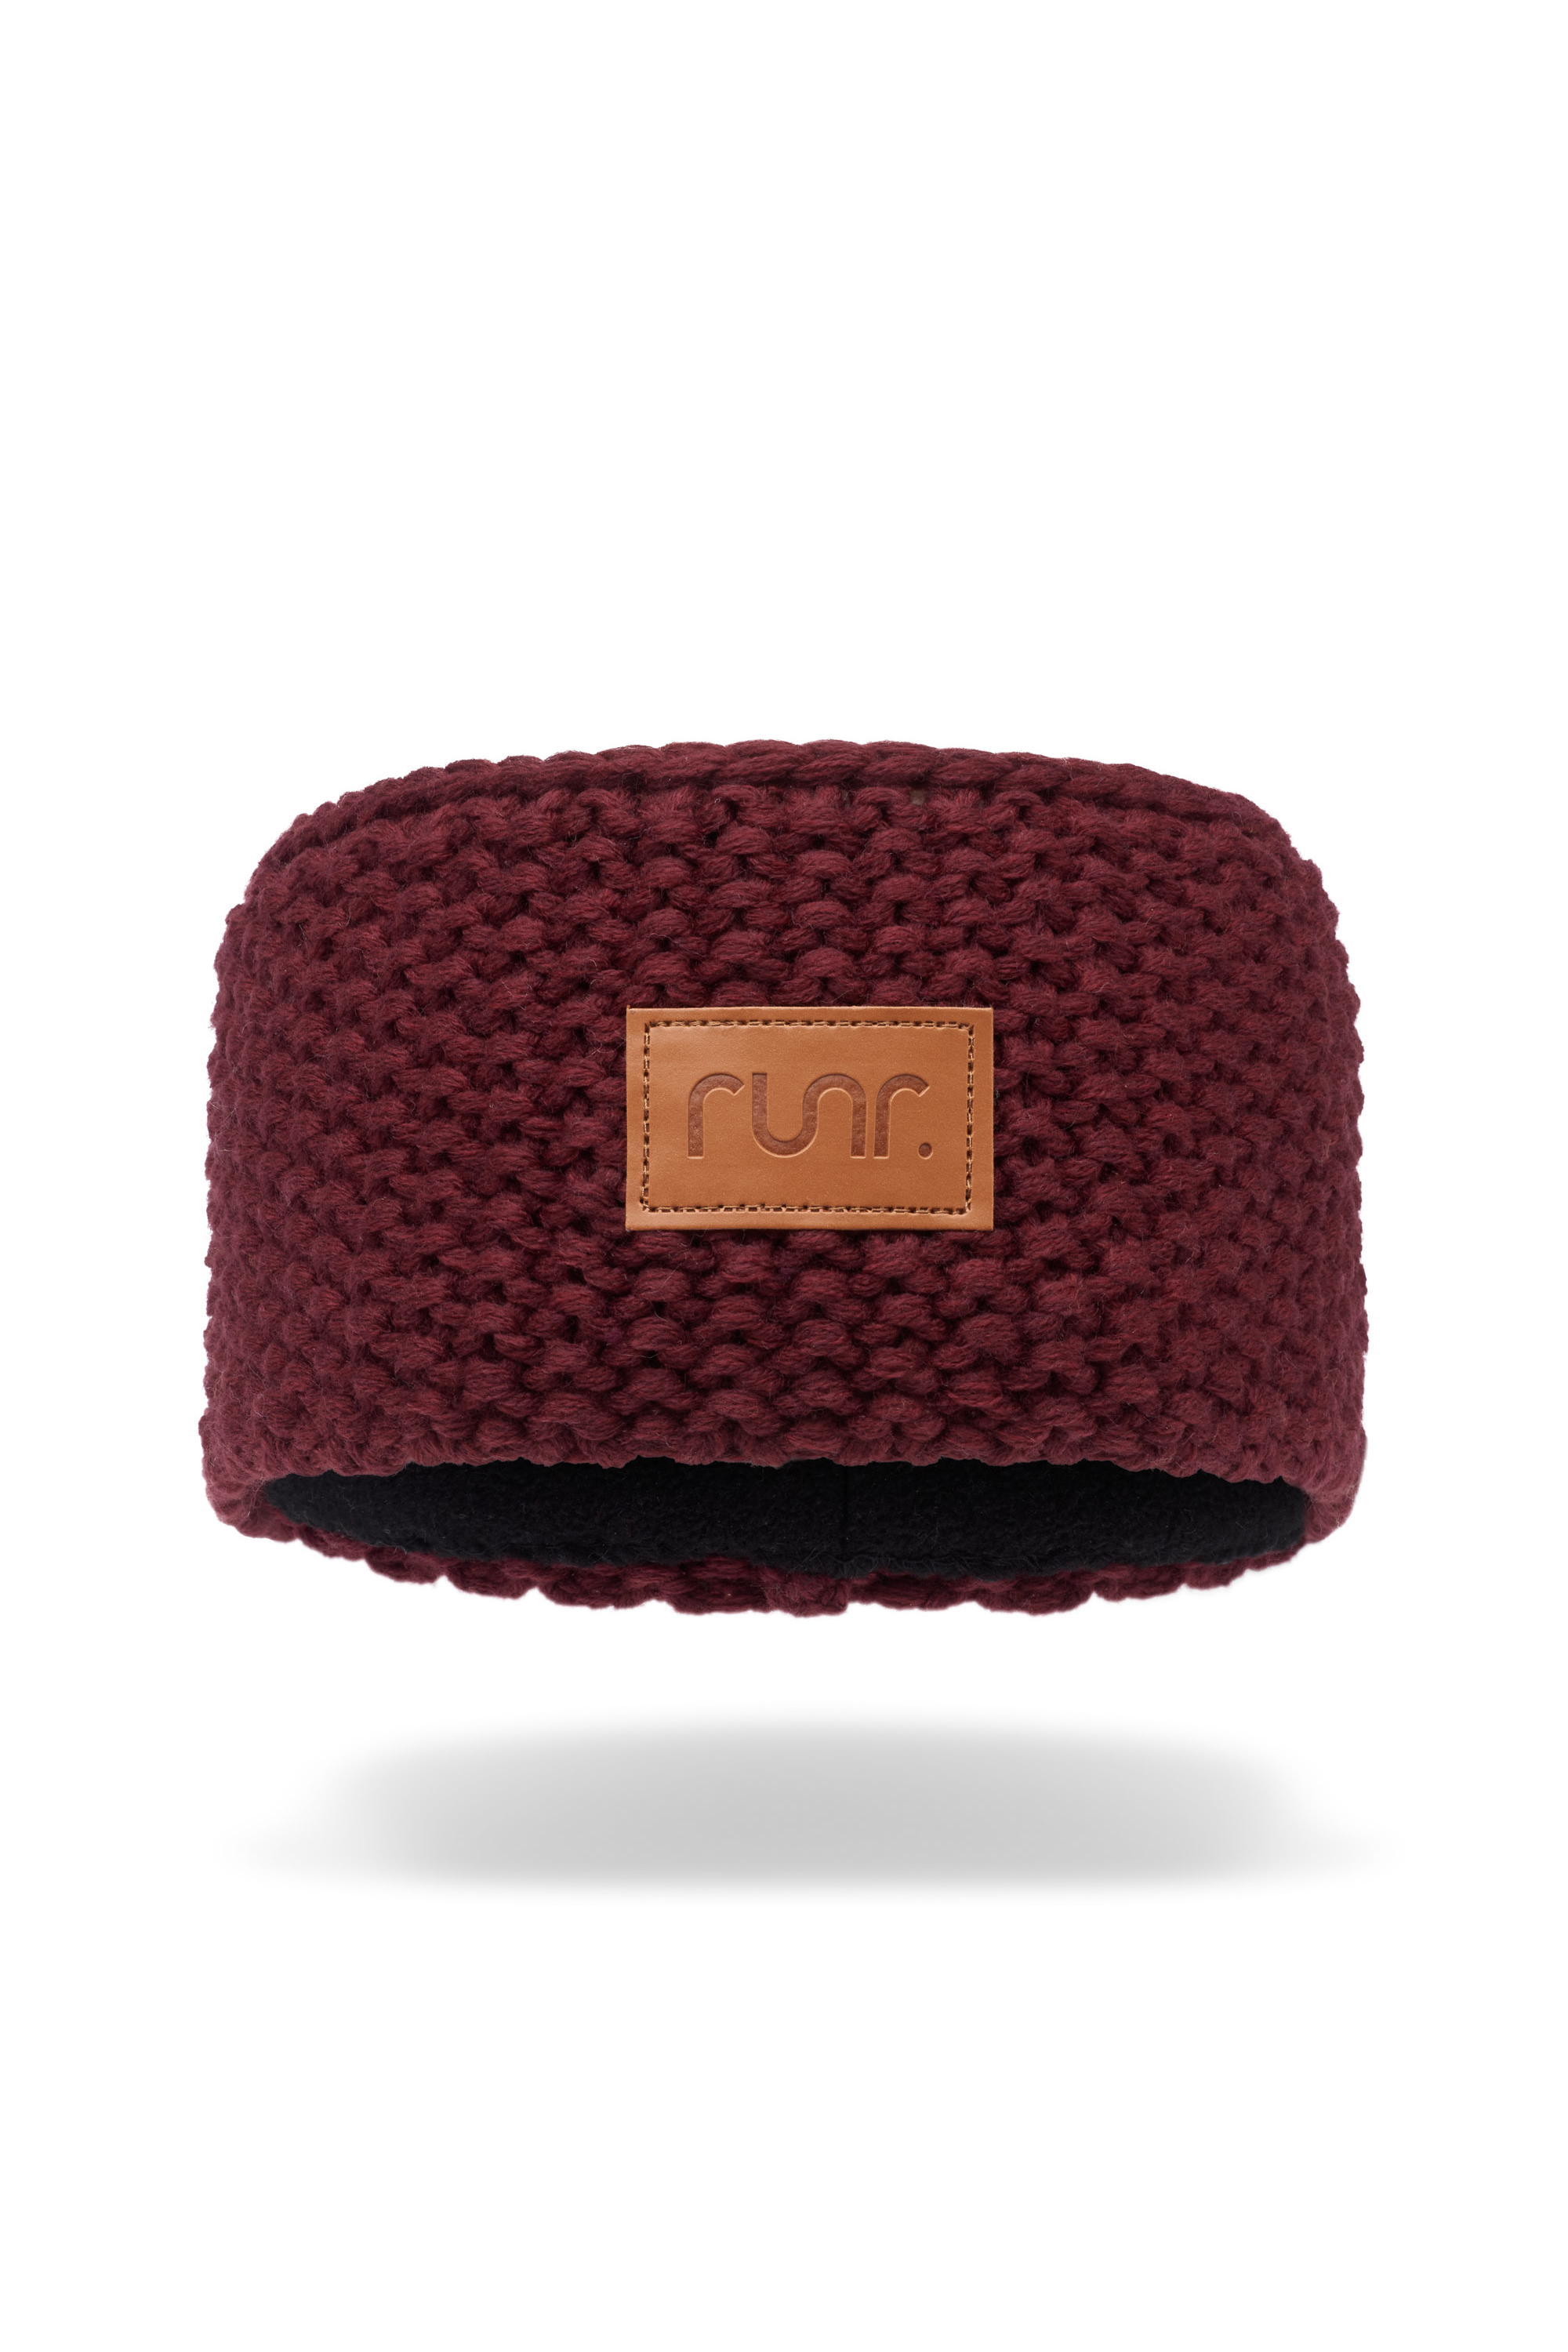 Runr Banff Headband With Faux Leather Label